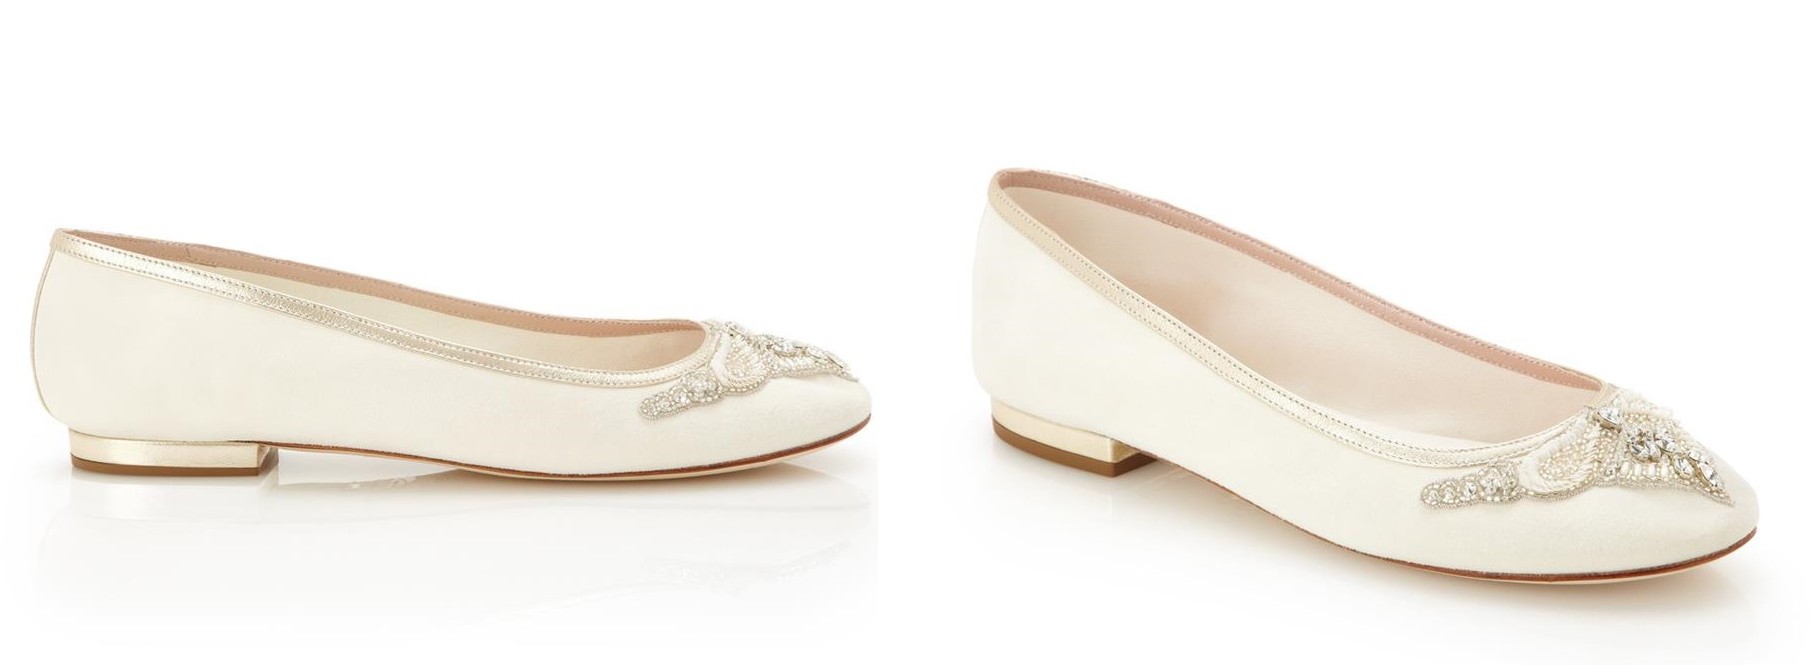 Stunning New Spring 2015 Bridal Shoes from Emmy London - Carrie